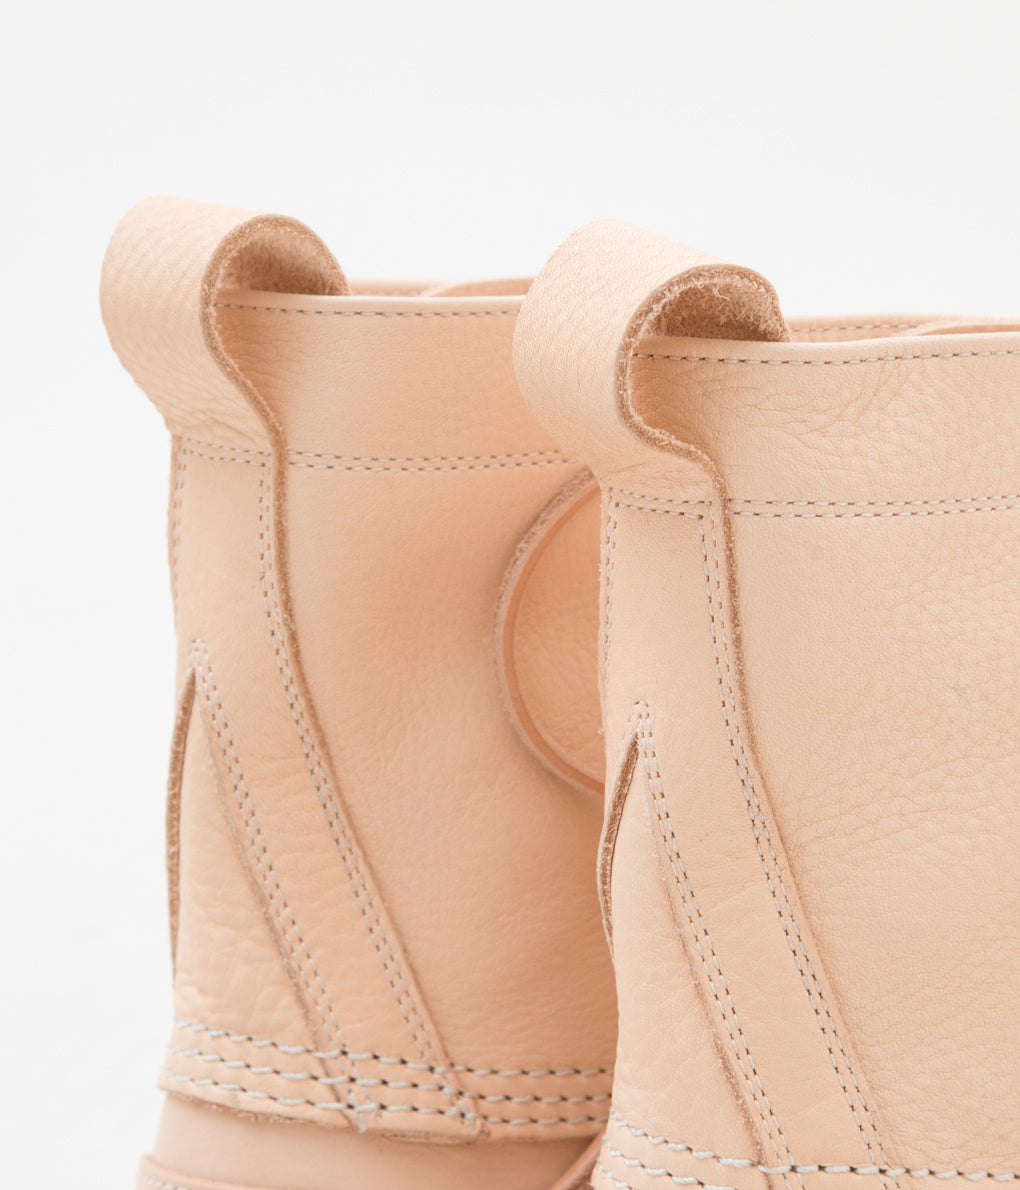 HENDER SCHEME "manual industrial products 26" (NATURAL)